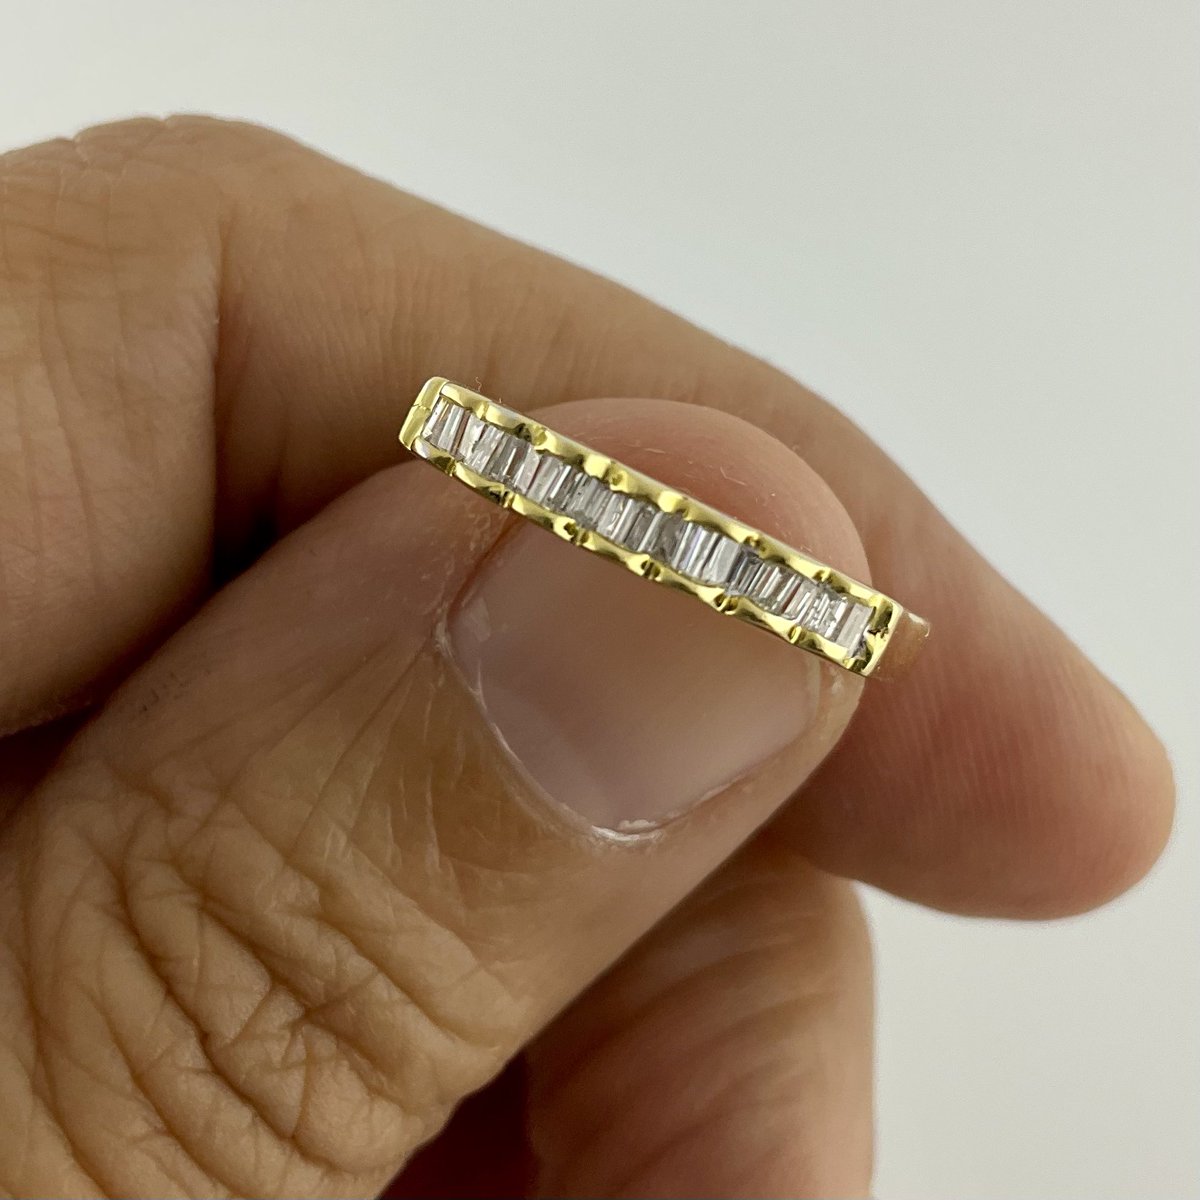 Available now! Ladies diamond ring set in 2.5 grams of 18k gold! Features 19 baguette diamonds for .25 ctw! Regularly priced at $399.99 but currently 40% off! Take it home for only $265 out the door!  #pawnshop #oakland #sanfrancisco #bestcollateral #gold #diamonds #diamondring